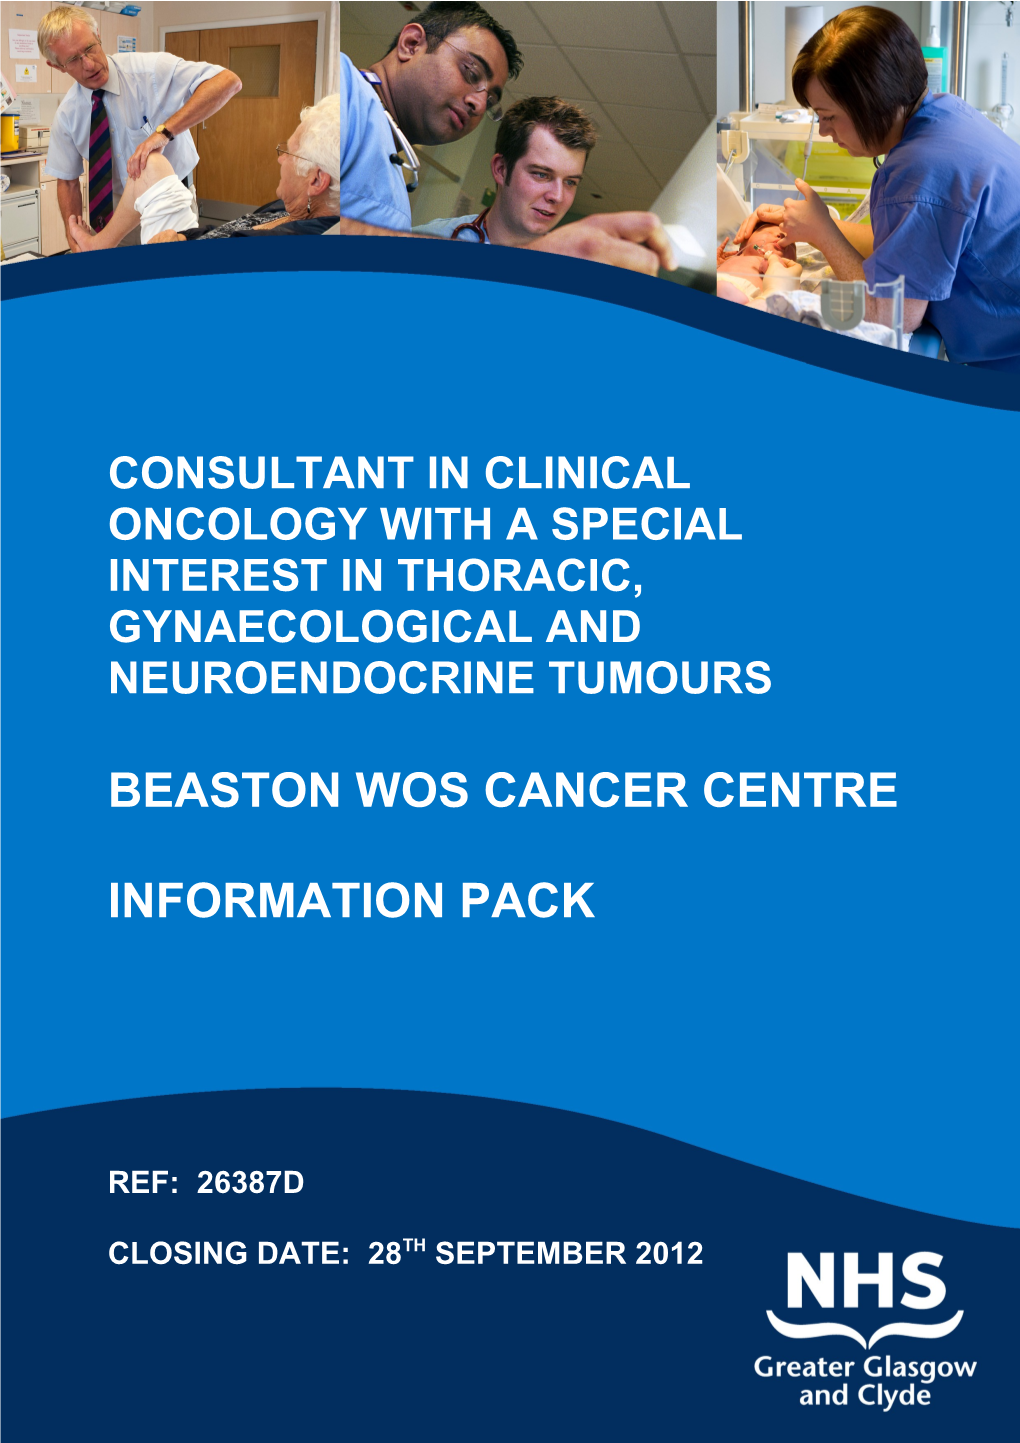 Consultant in Clinical Oncology with a Special Interest in Thoracic, Gynaecological And